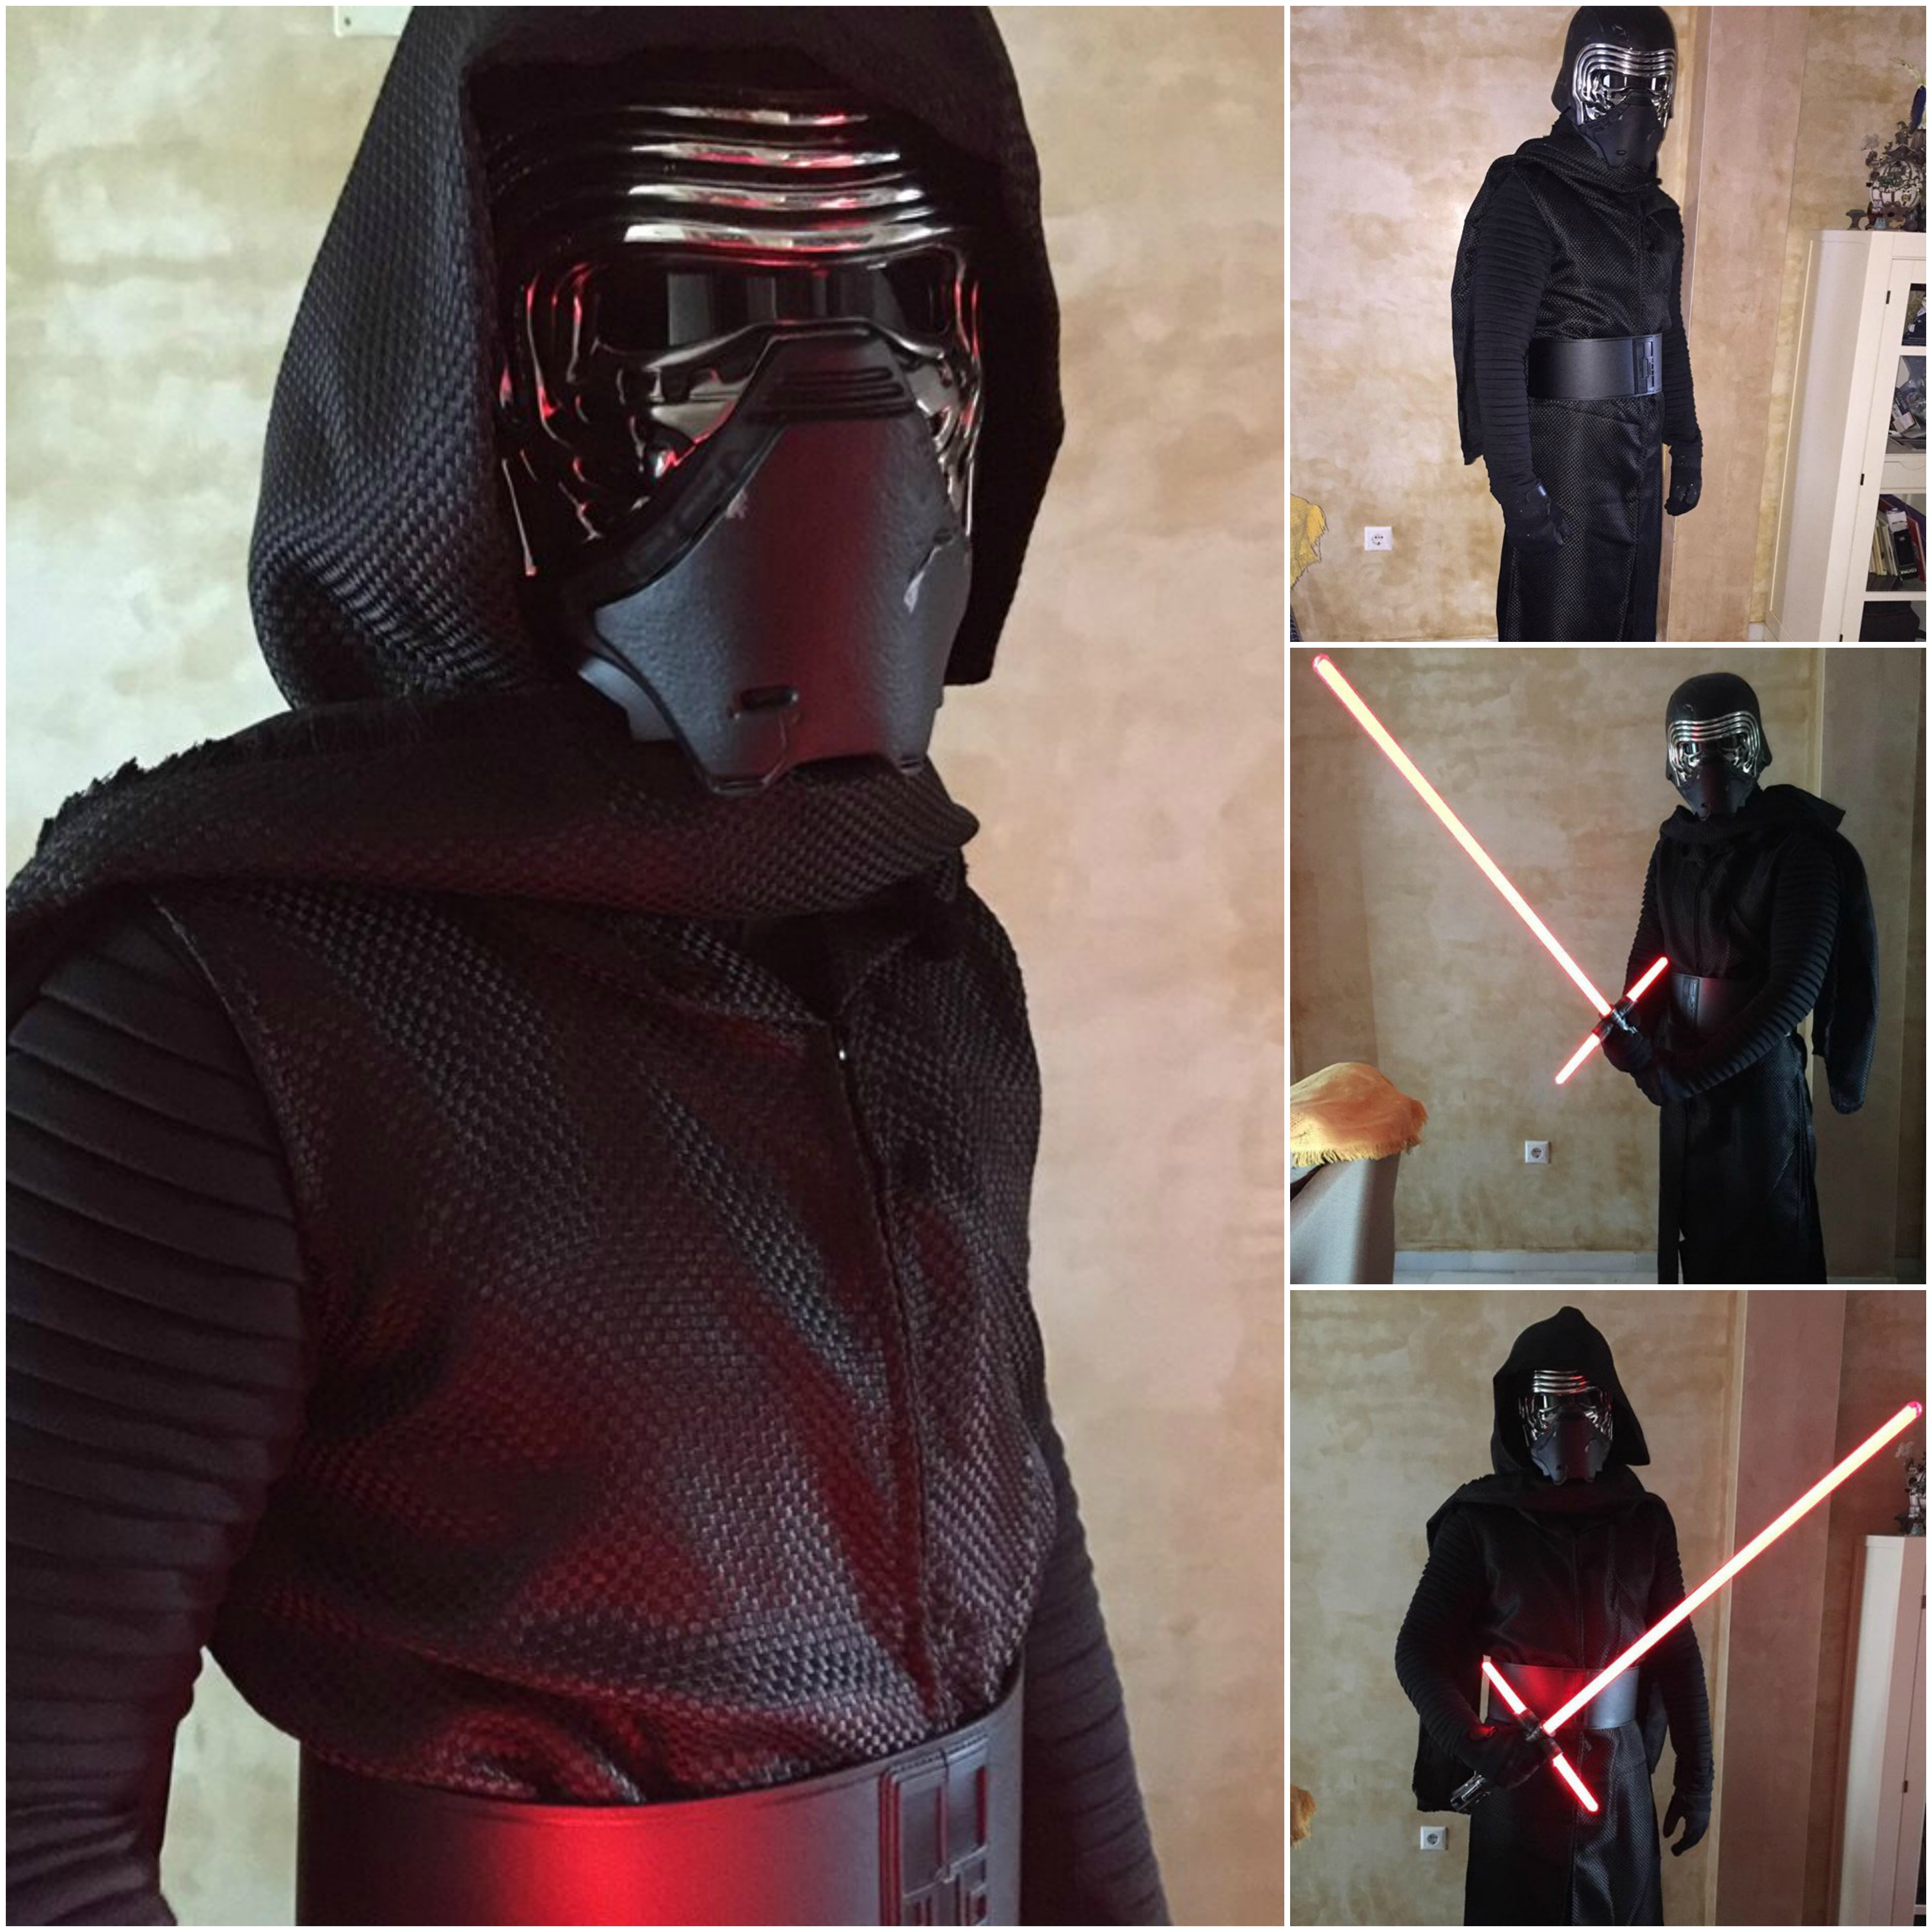 kylo review 1